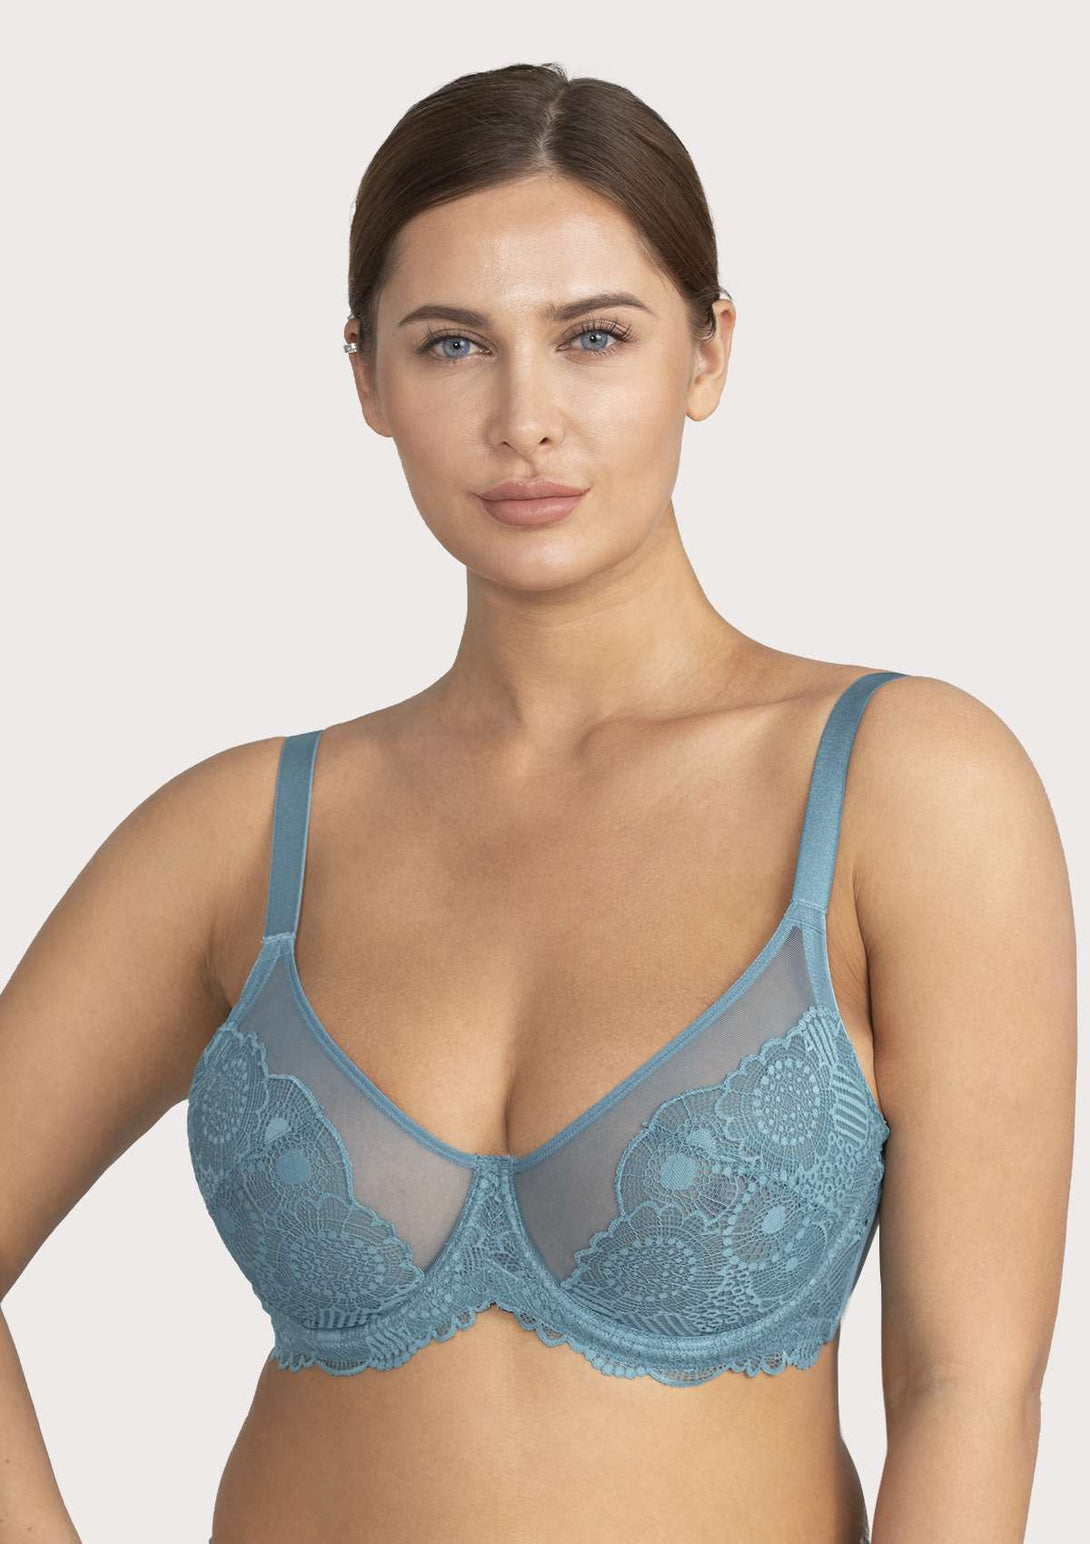 HSIA HSIA Sexy Unlined Underwire Bra 34C / Crystal Blue